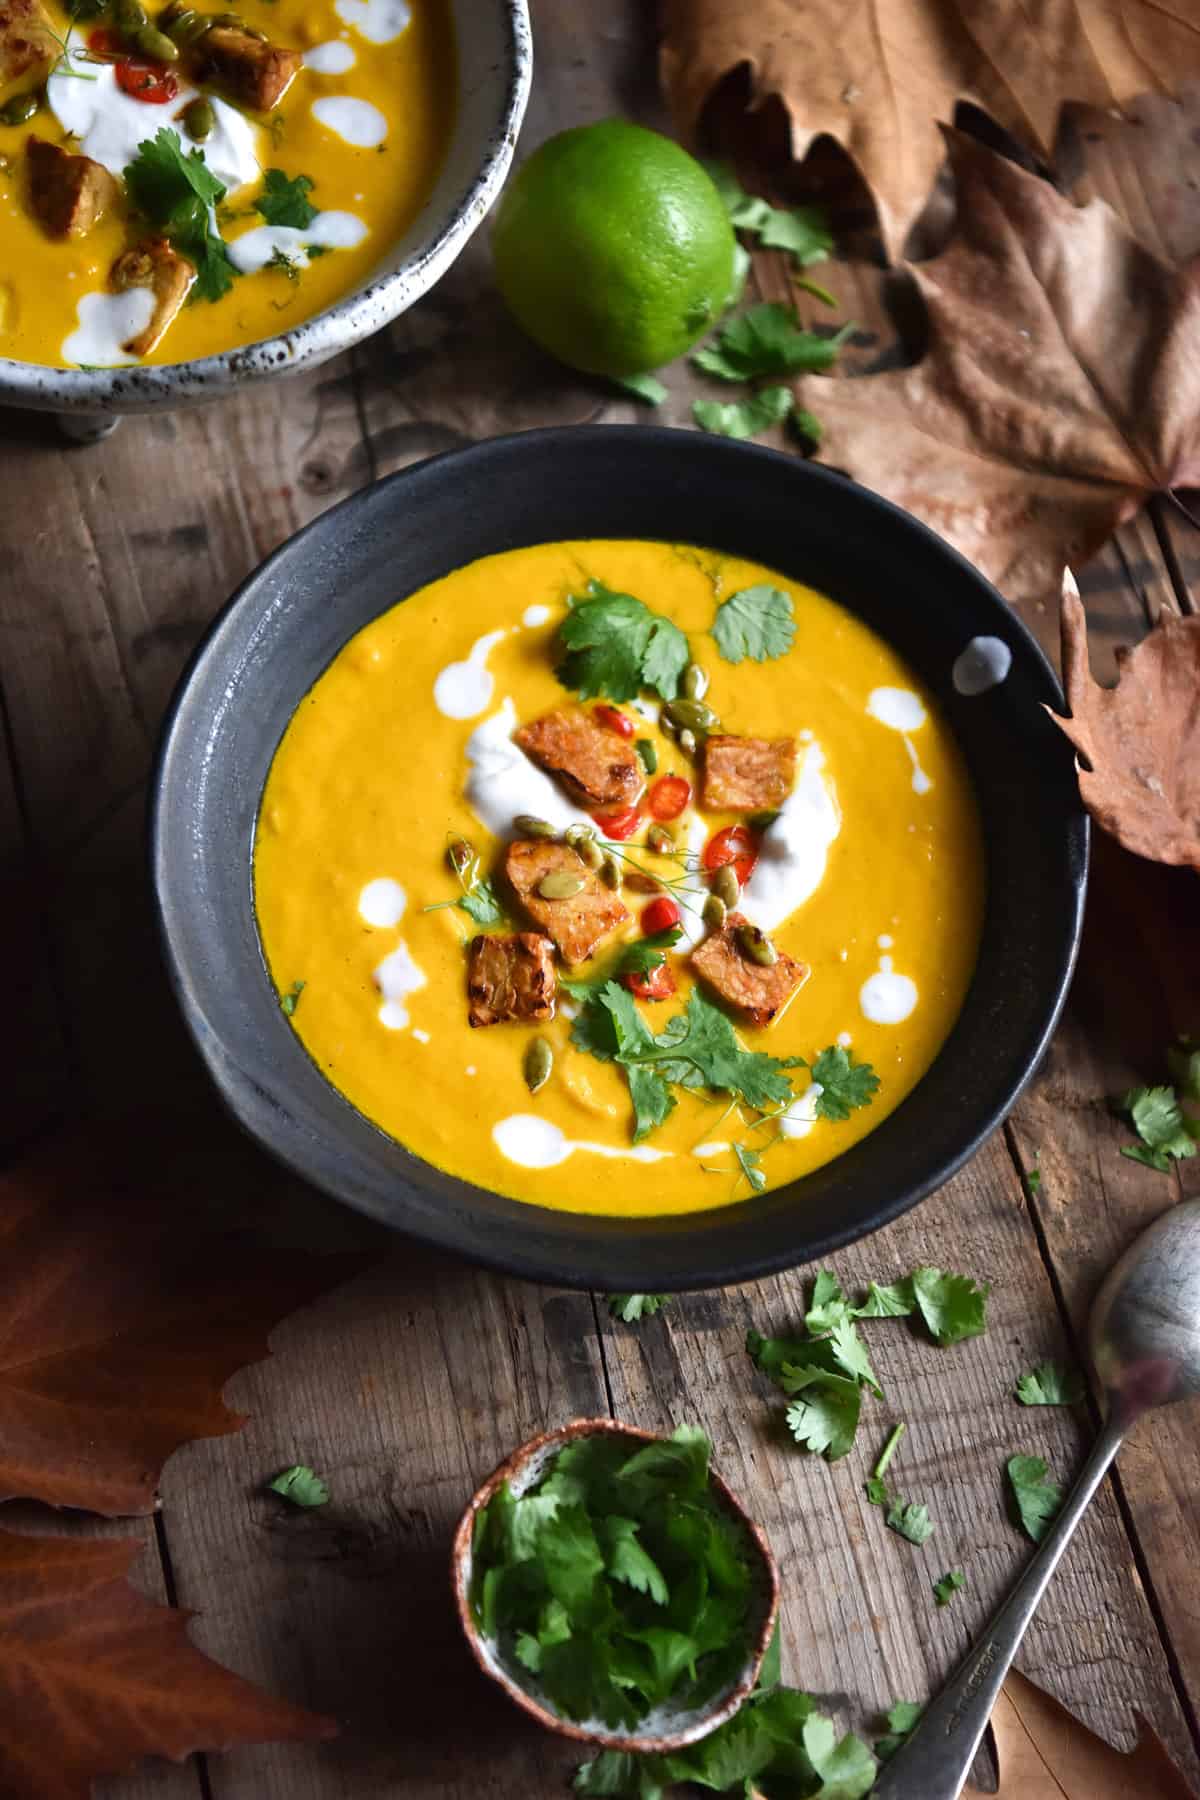 Vegan Thai carrot soup with crunchy tempeh bits. The soup is in a dark ceramic bowl on a wooden table surrounded by extra herbs and fall leaves.